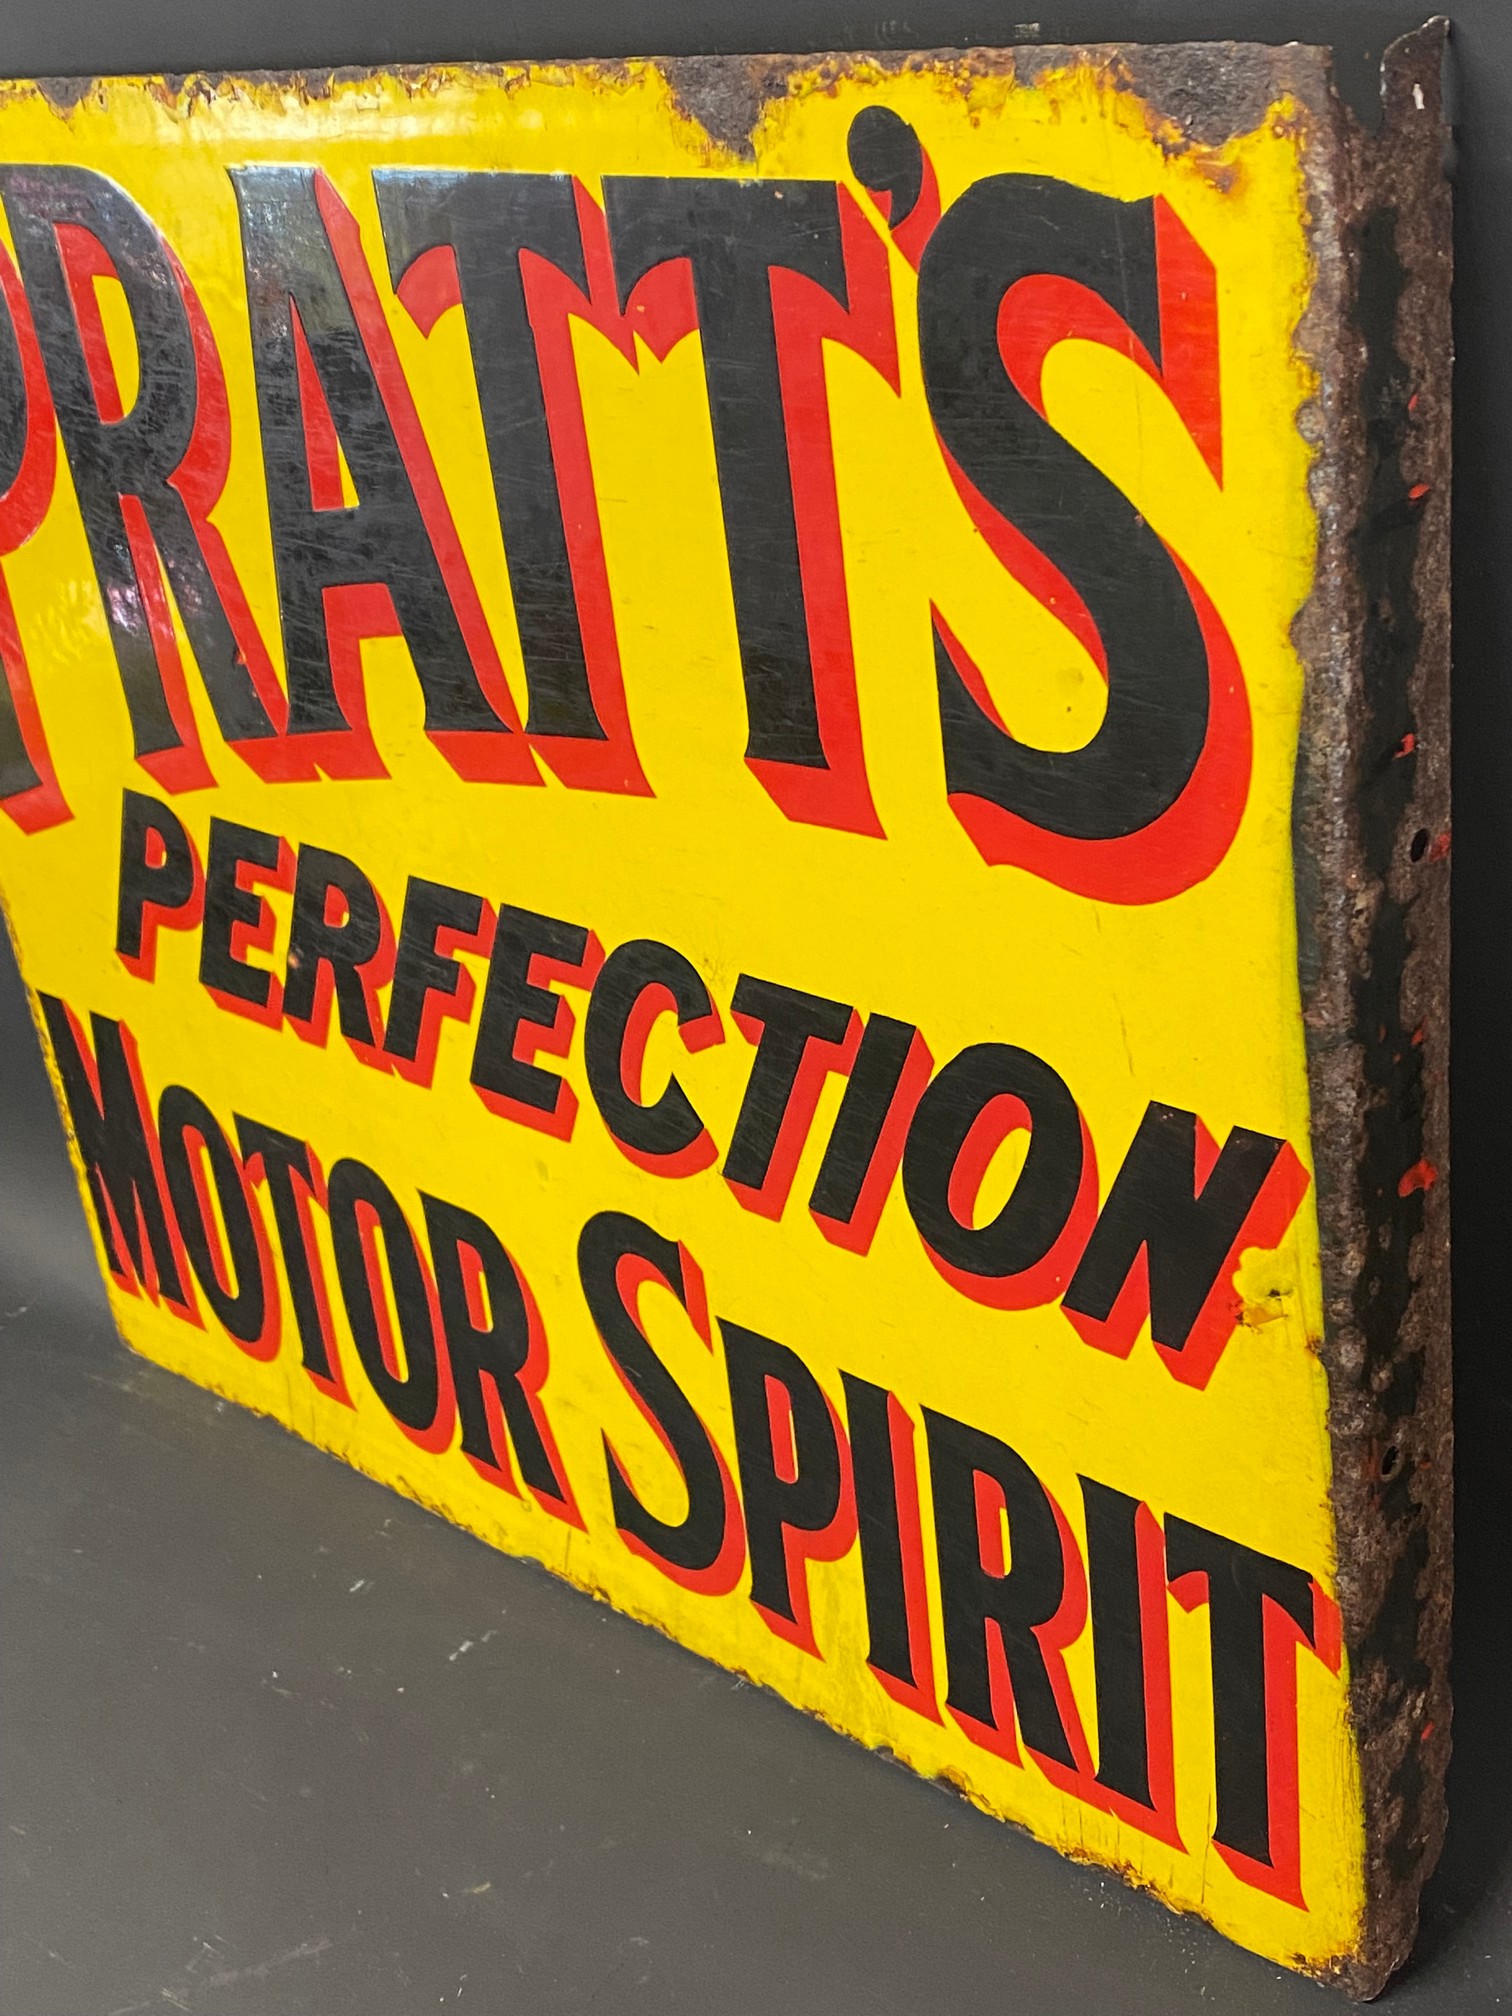 A Pratt's Perfection Motor Spirit double sided enamel sign by Bruton, 21 x 18". - Image 5 of 5